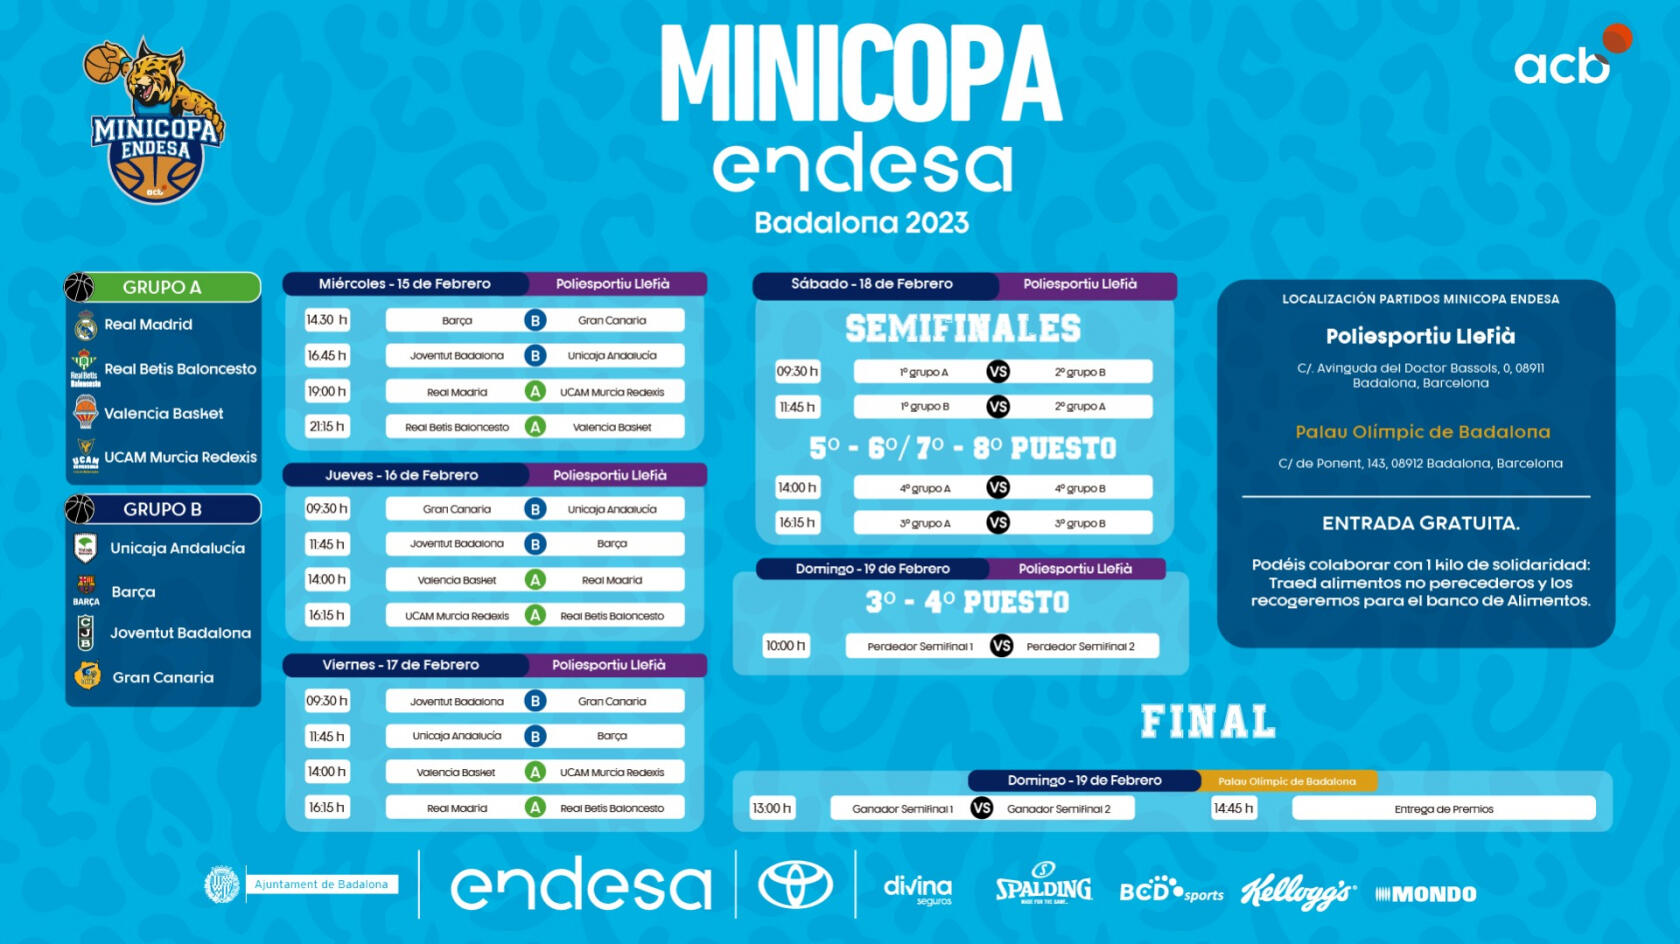 The schedule of the Minicopa Endesa has been raffled